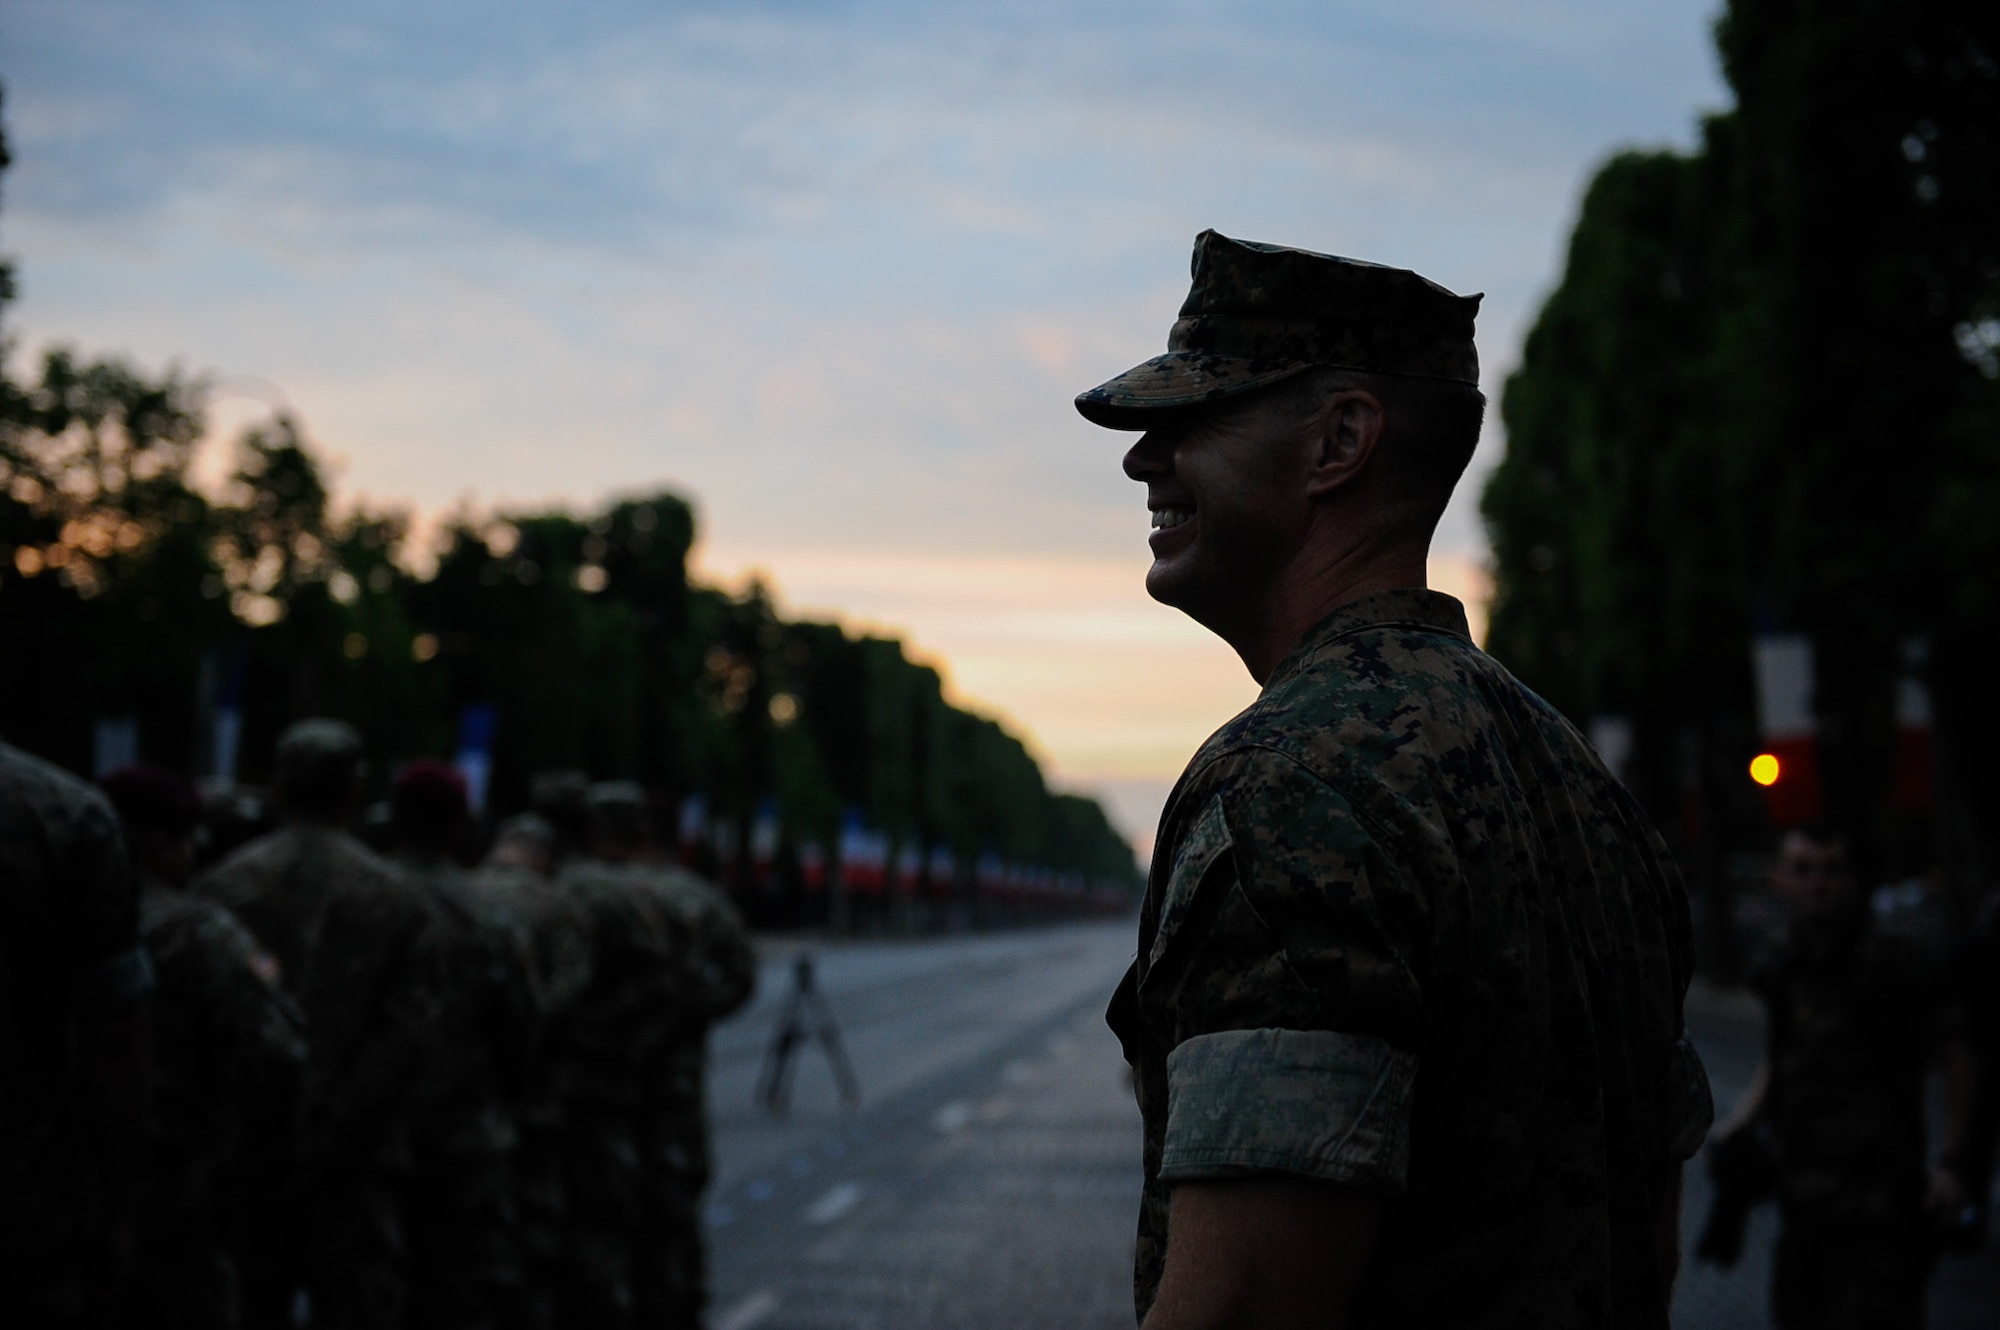 U.S. Marine Corps Sergeant Major Mark Shawhan, Combat Logistics Battalion 24 battalion sergeant major, surveys the formation during rehearsal for the Bastille Day military parade at the Avenue des Champs-Élysées, France, July 10, 2017. U.S. military members arrived at Lycee Militaire de Saint-Cyr and stayed for more than a week to participate in and prepare for France’s Bastille Day military parade on July 14, 2017. (U.S. Air Force photo by Airman 1st Class Savannah L. Waters)